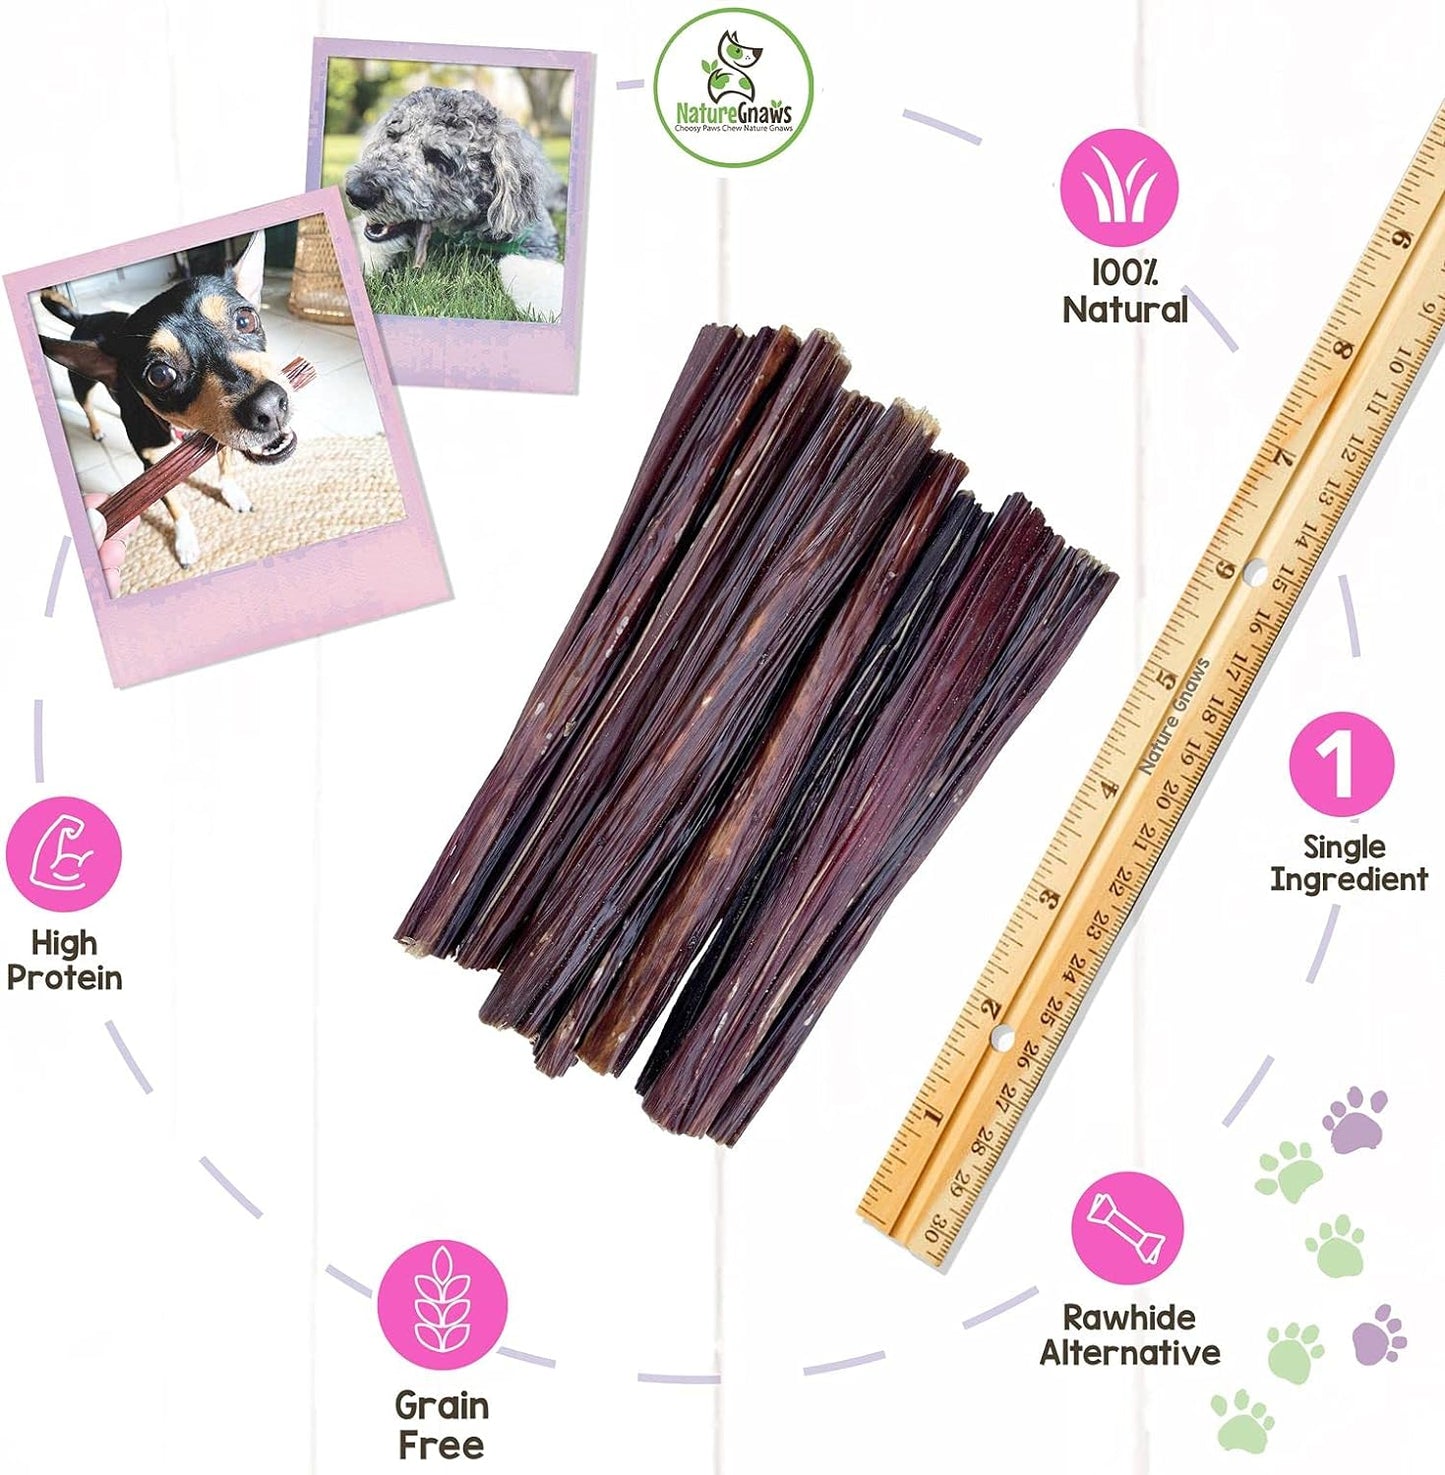 - Beef Jerky Sticks for Dogs - Premium Natural Beef Gullet Bones - Simple Single Ingredient Tasty Dog Chew Treats - Rawhide Free 5-6 Inch (1Lb)